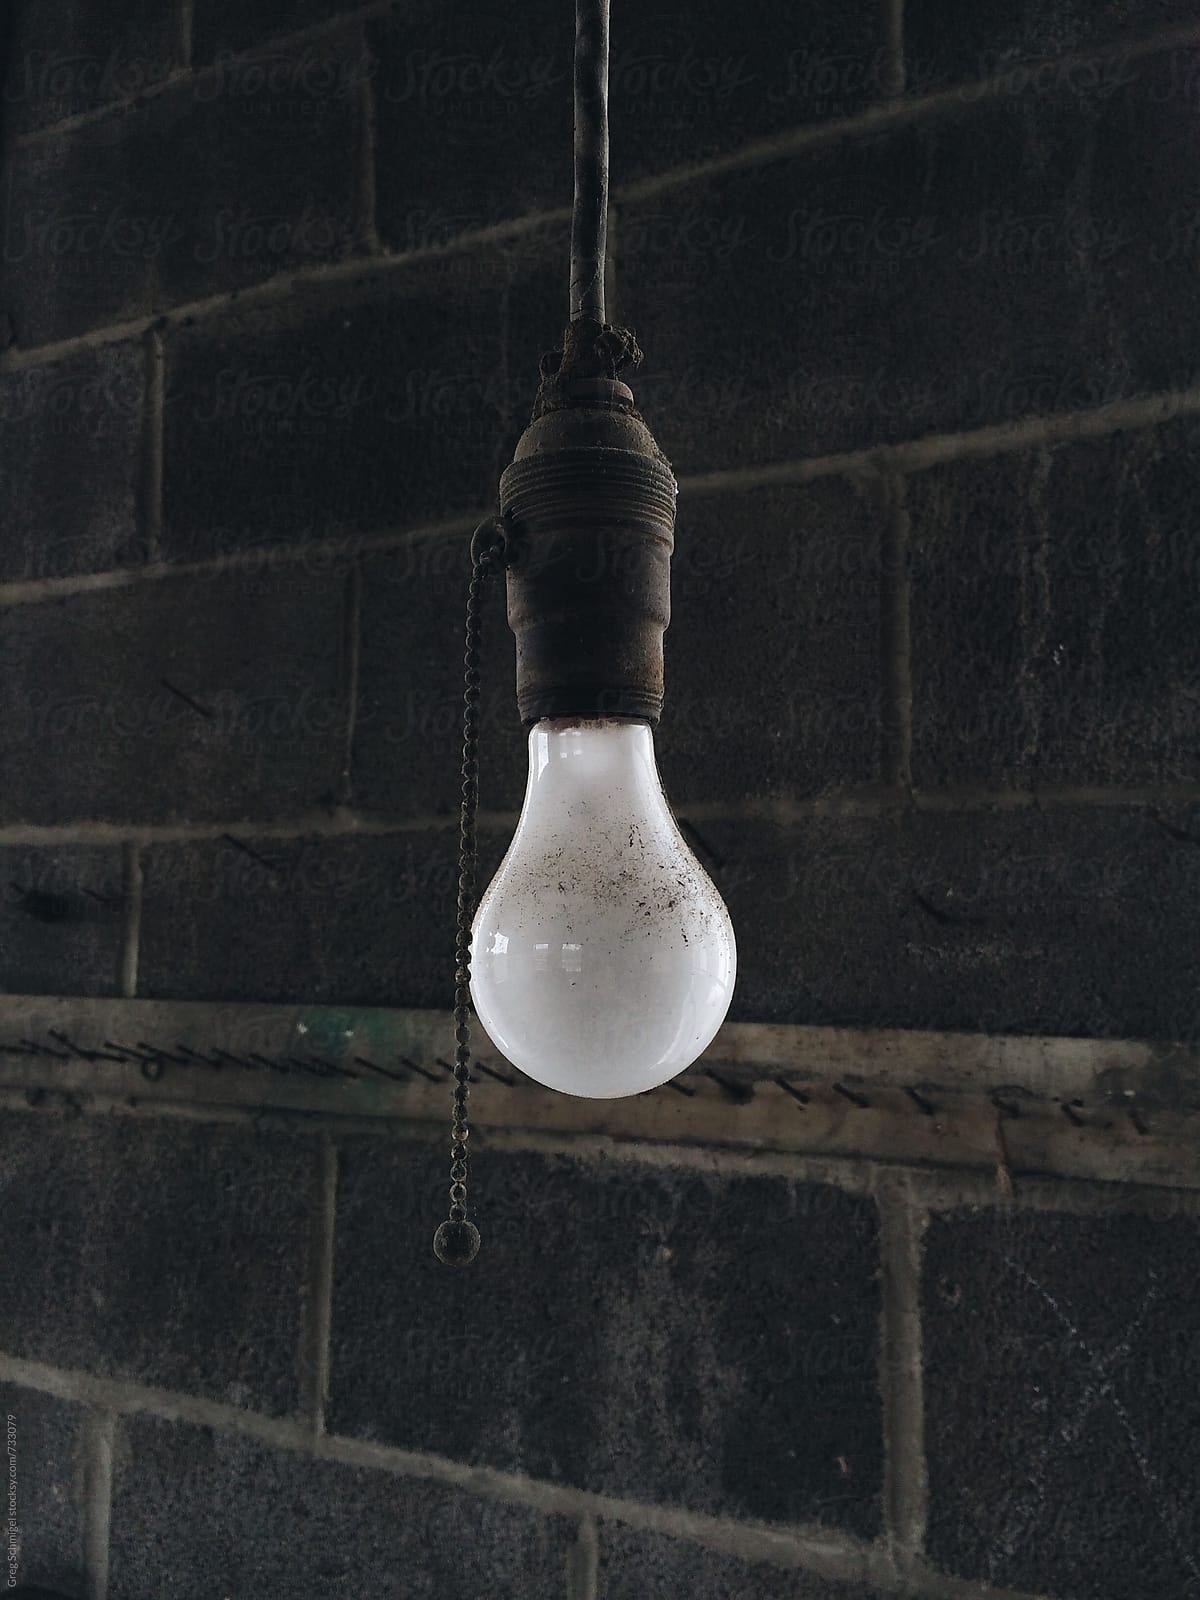 Sincle light bulb hanging from a ceiling in an abandoned garage